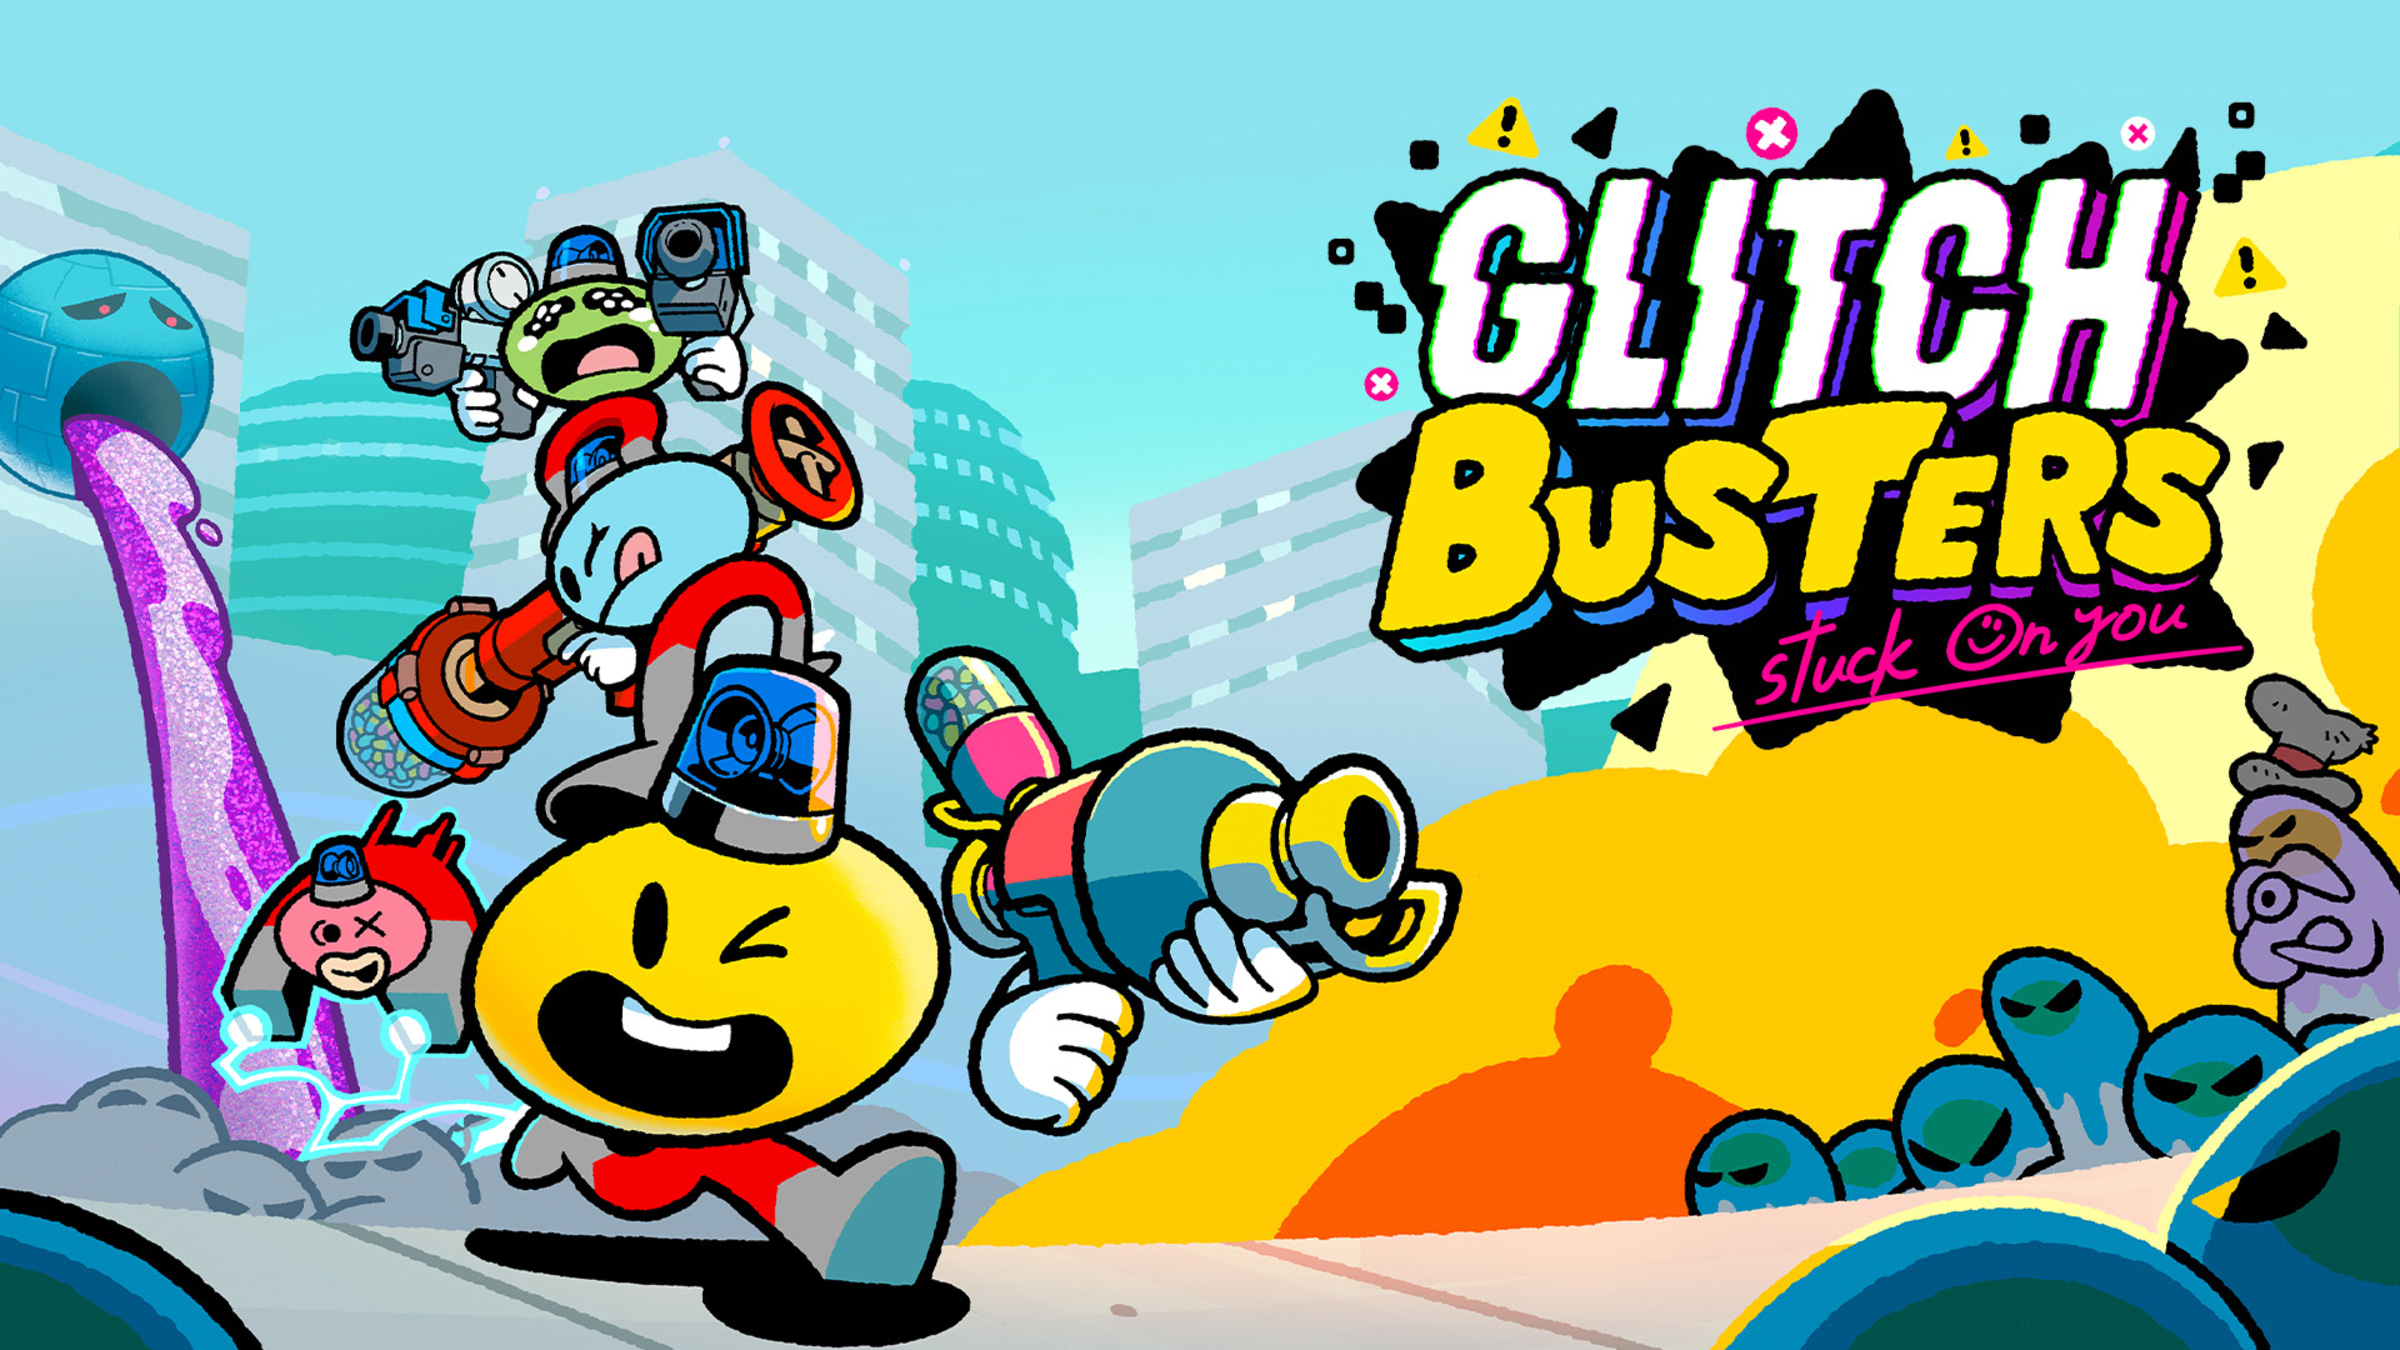 Glitch Busters interview: Busting glitches in a cartoon internet